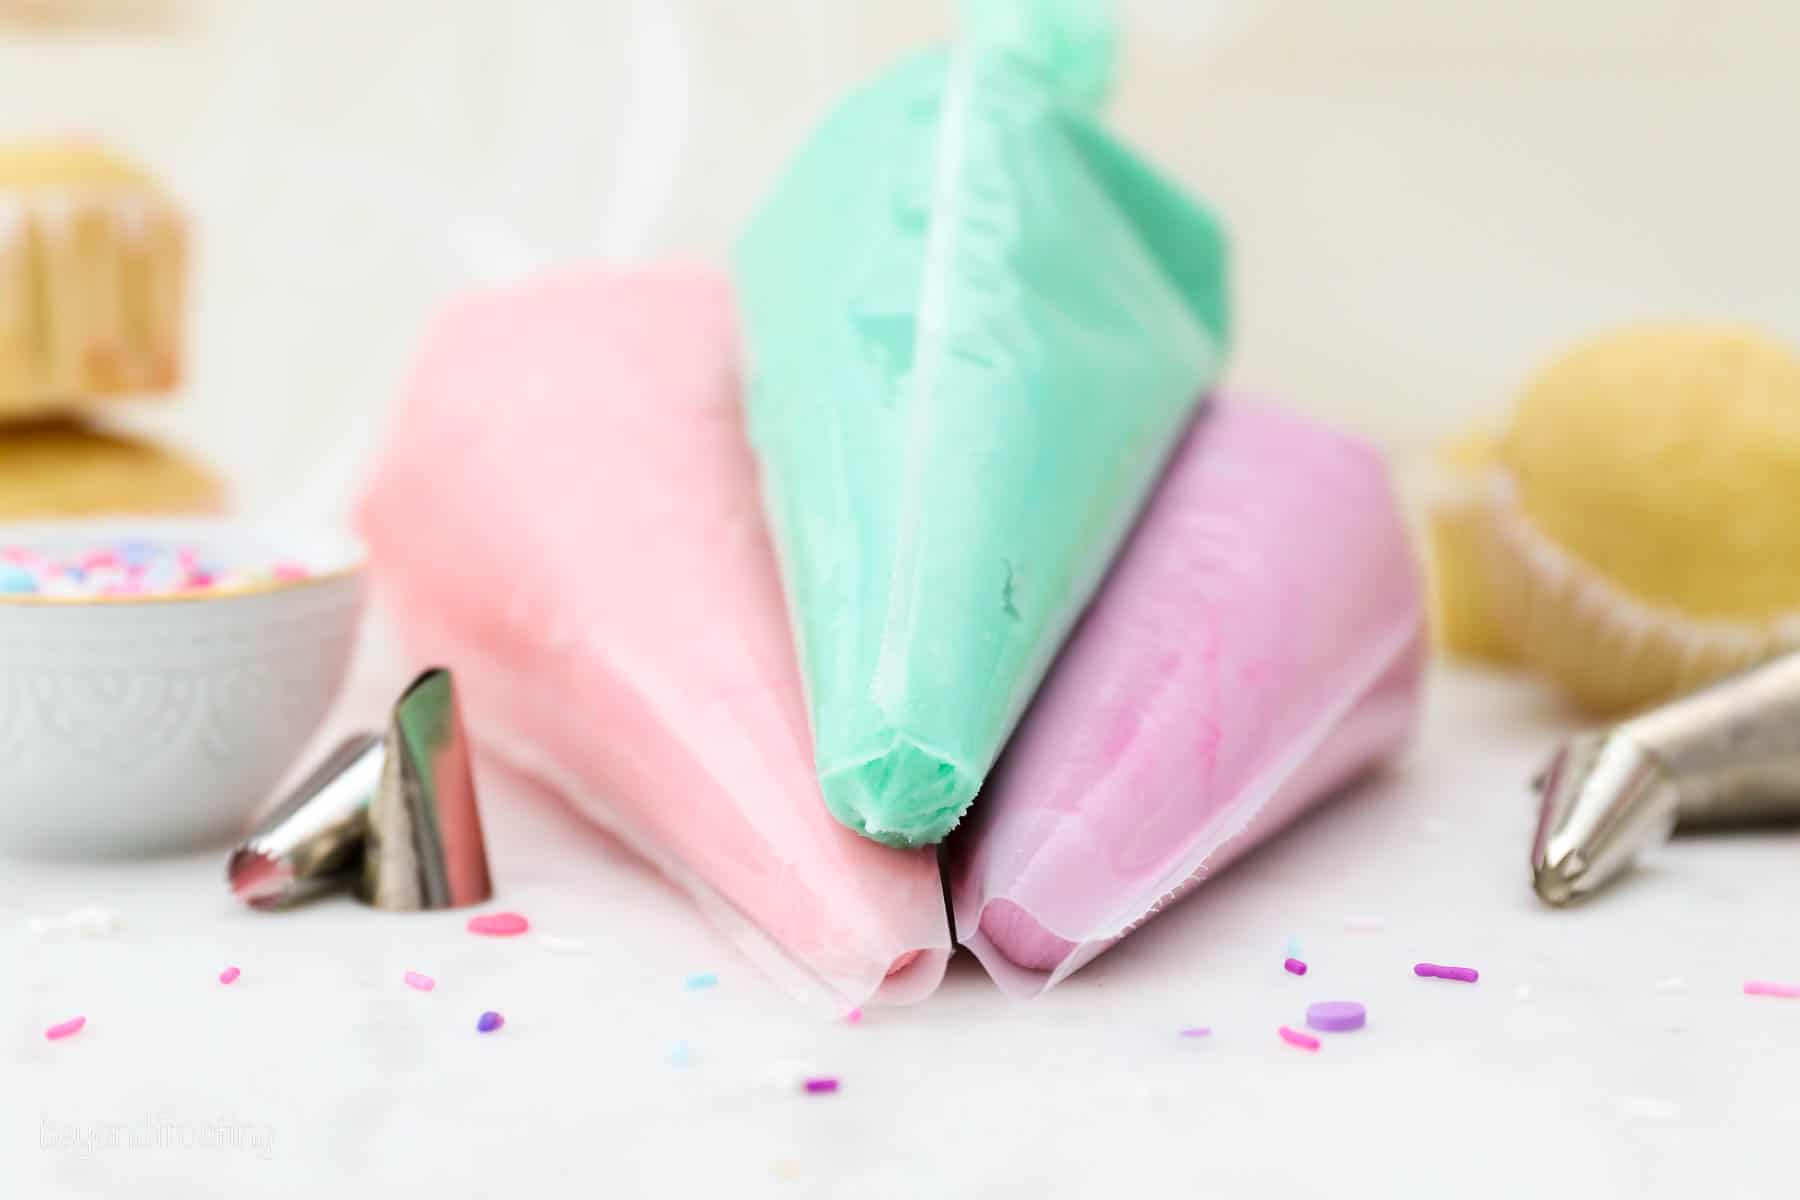 Three piping bags filled with pink, teal, and purple buttercream frosting stacked on a countertop next to piping tips.